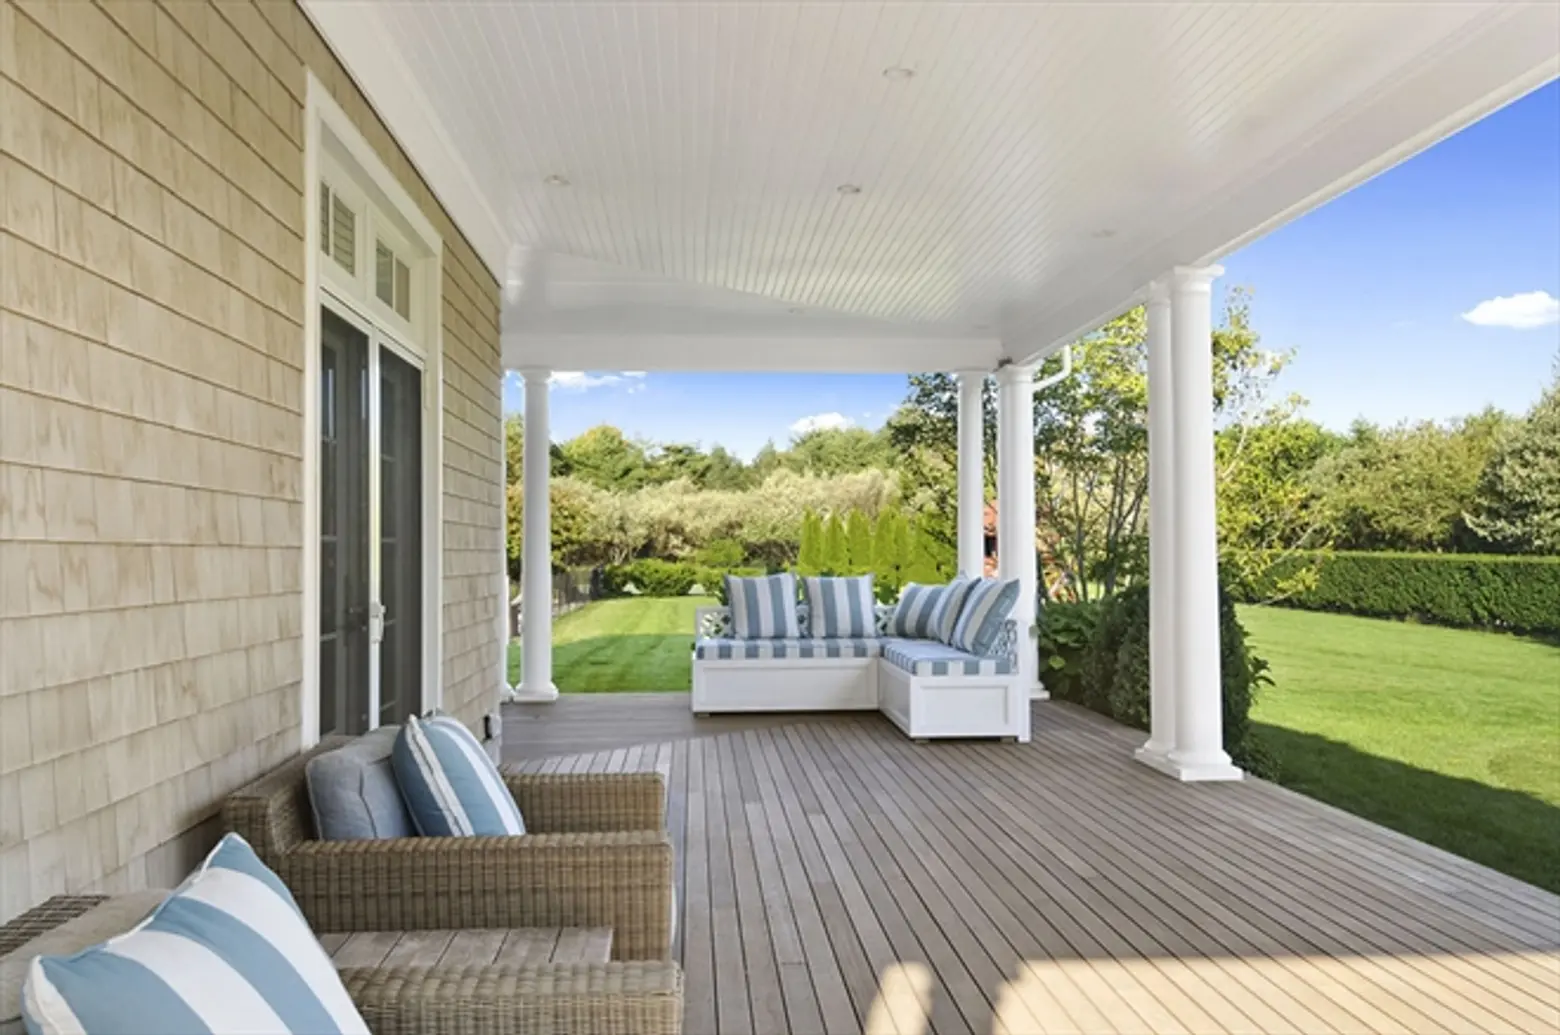 homes hamptons, famous homes for sale, tennis court hamptons, beach style furnishings, wrap around porch